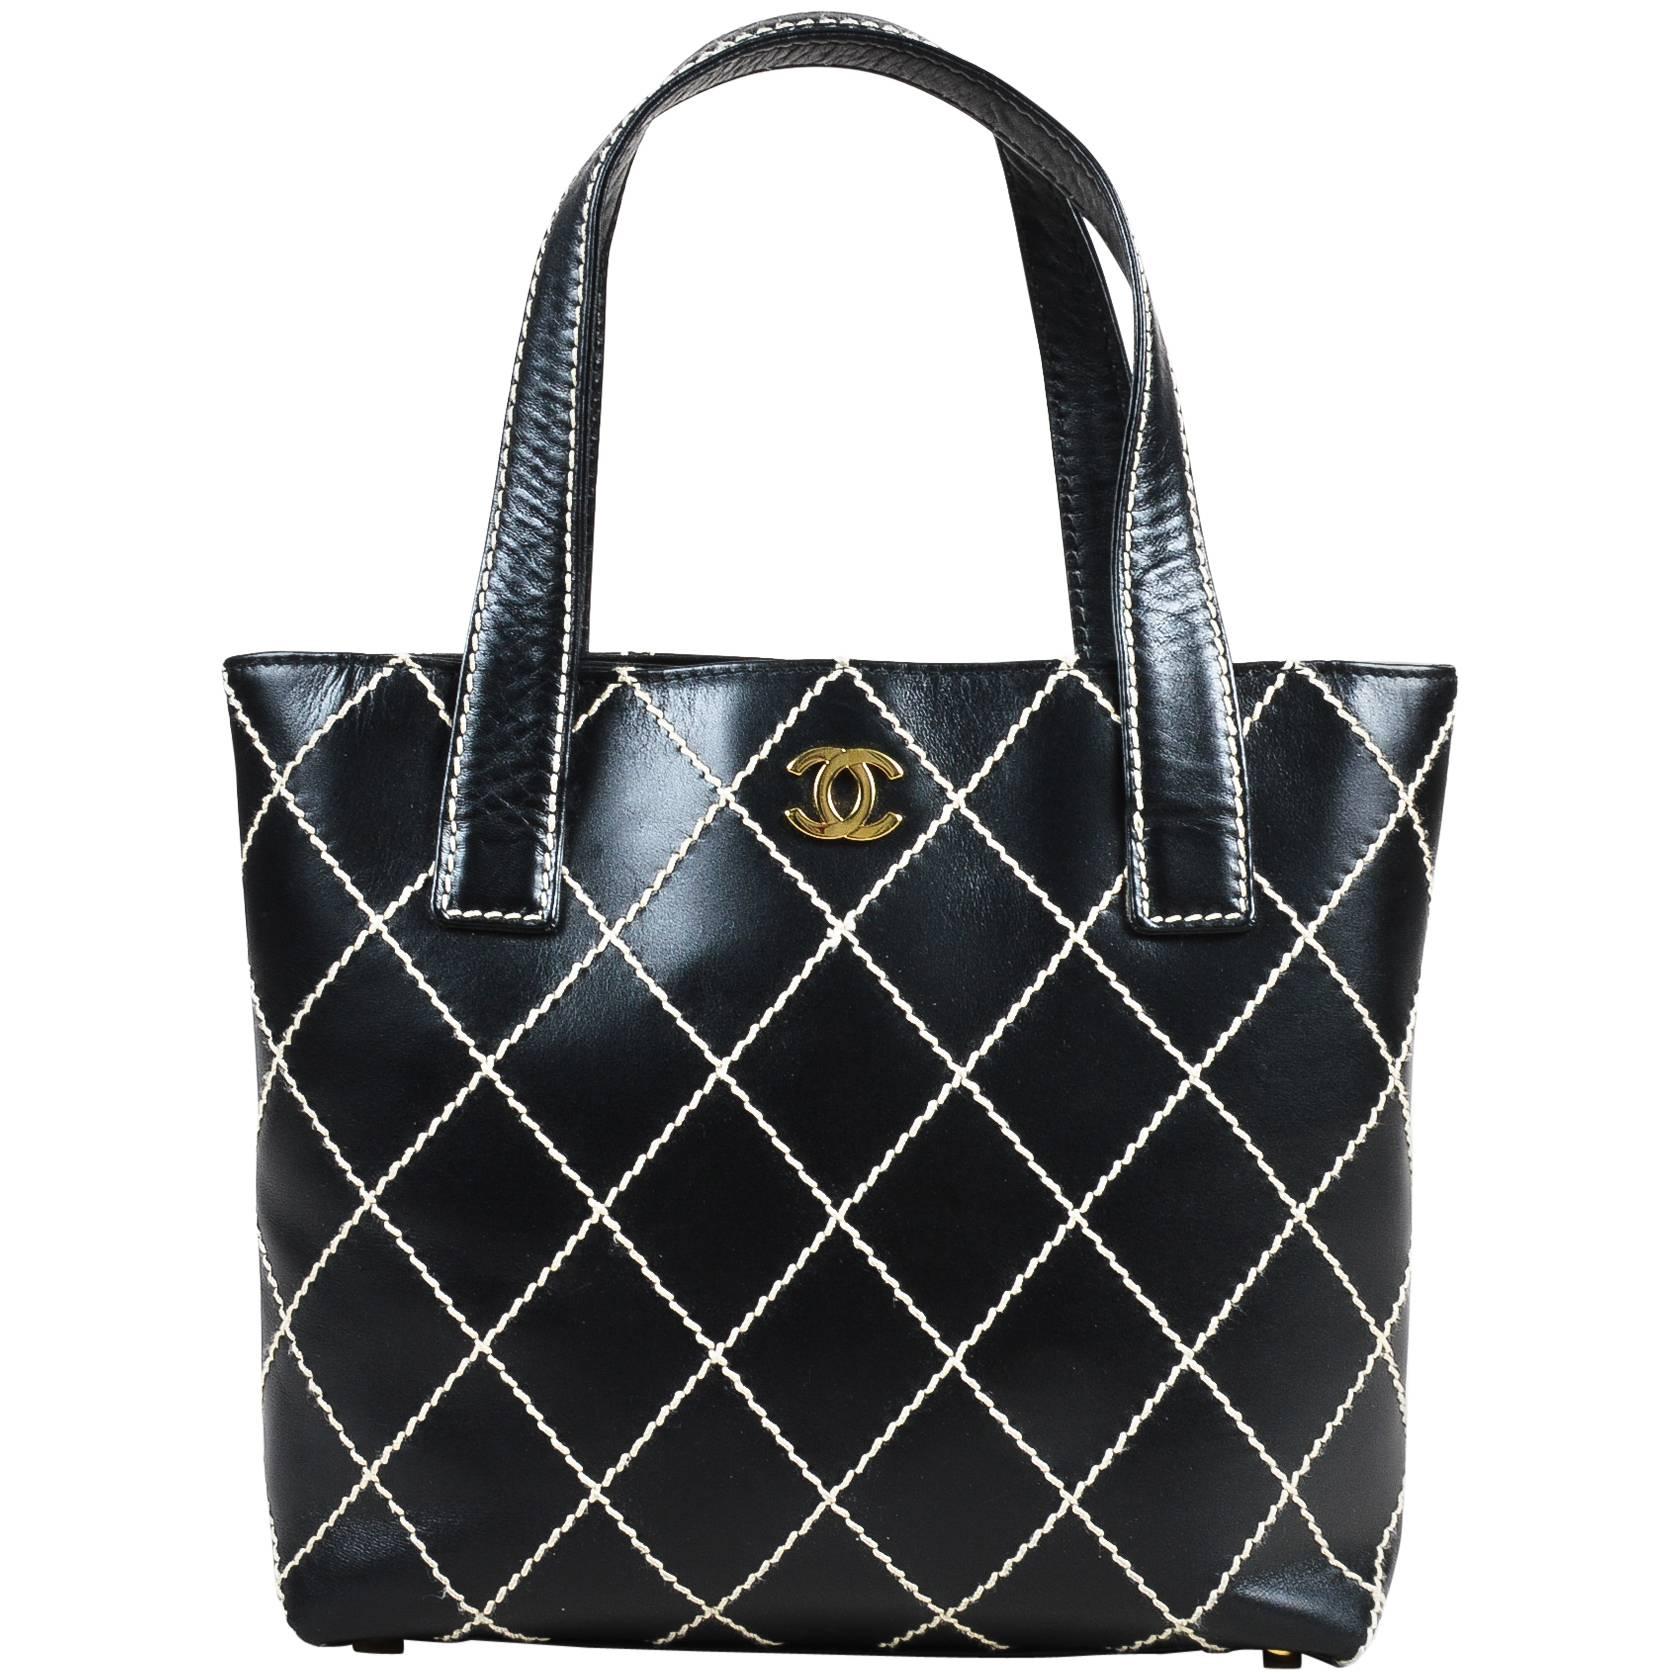 Chanel Black White Leather Gold Tone 'CC' Double Handle "Wild Stitch" Tote Bag For Sale